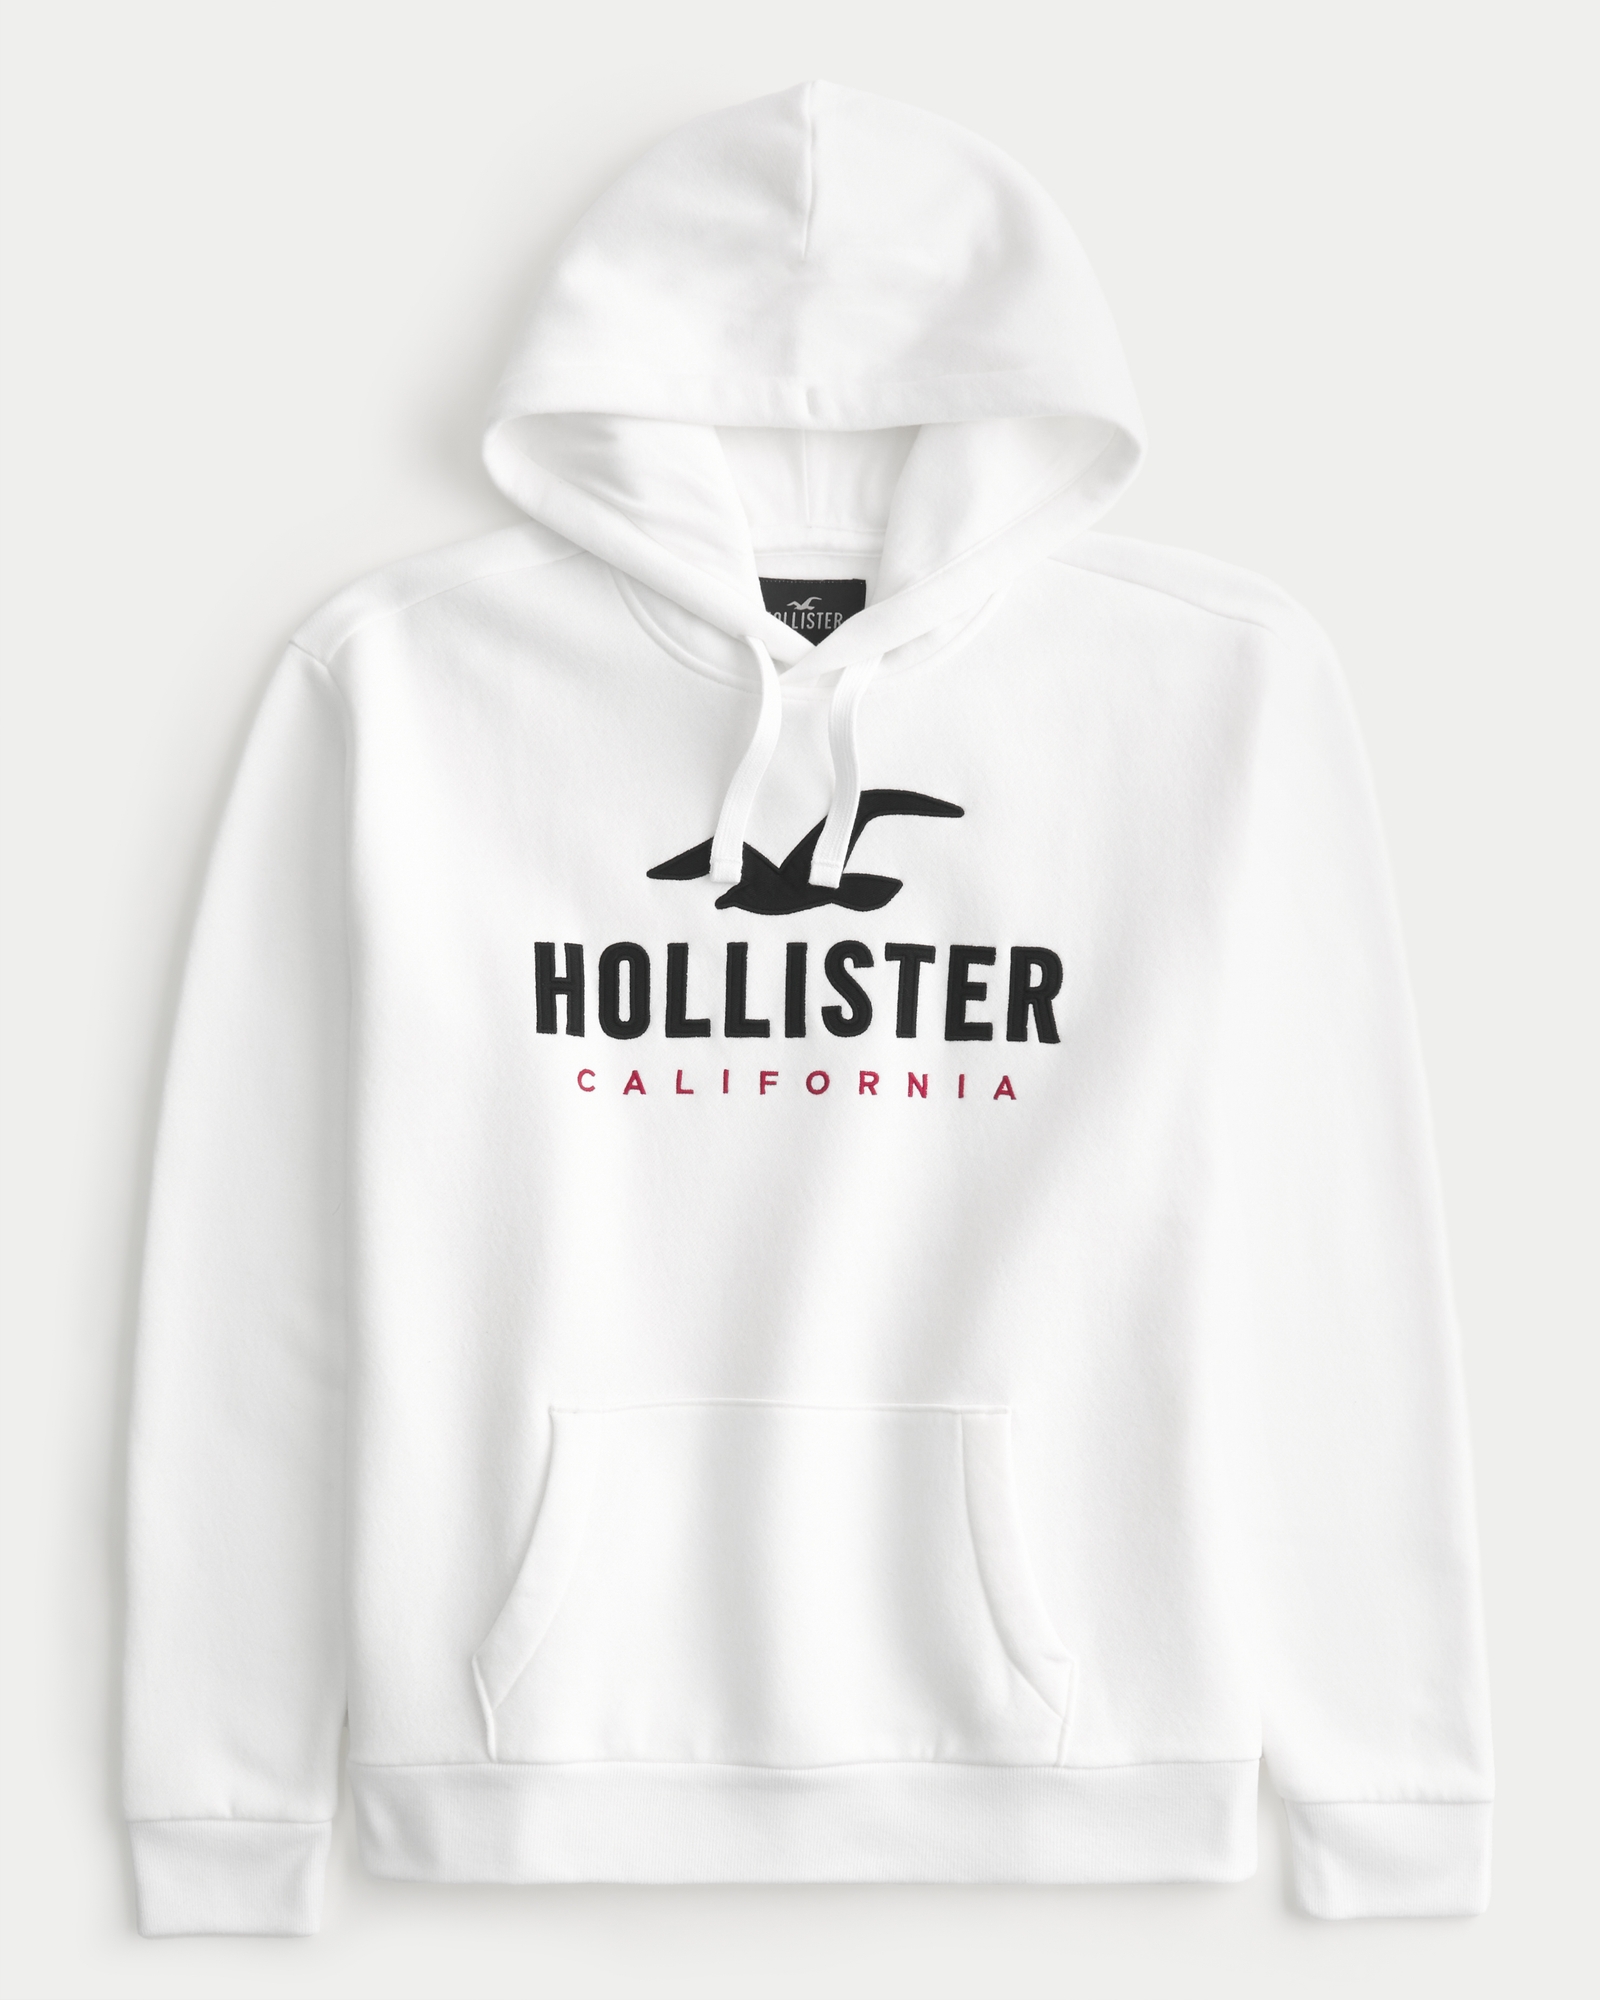  Wheel Spin Addict Men's Hollister Hills American Flag Hoodie  Carolina Blue/S : Clothing, Shoes & Jewelry